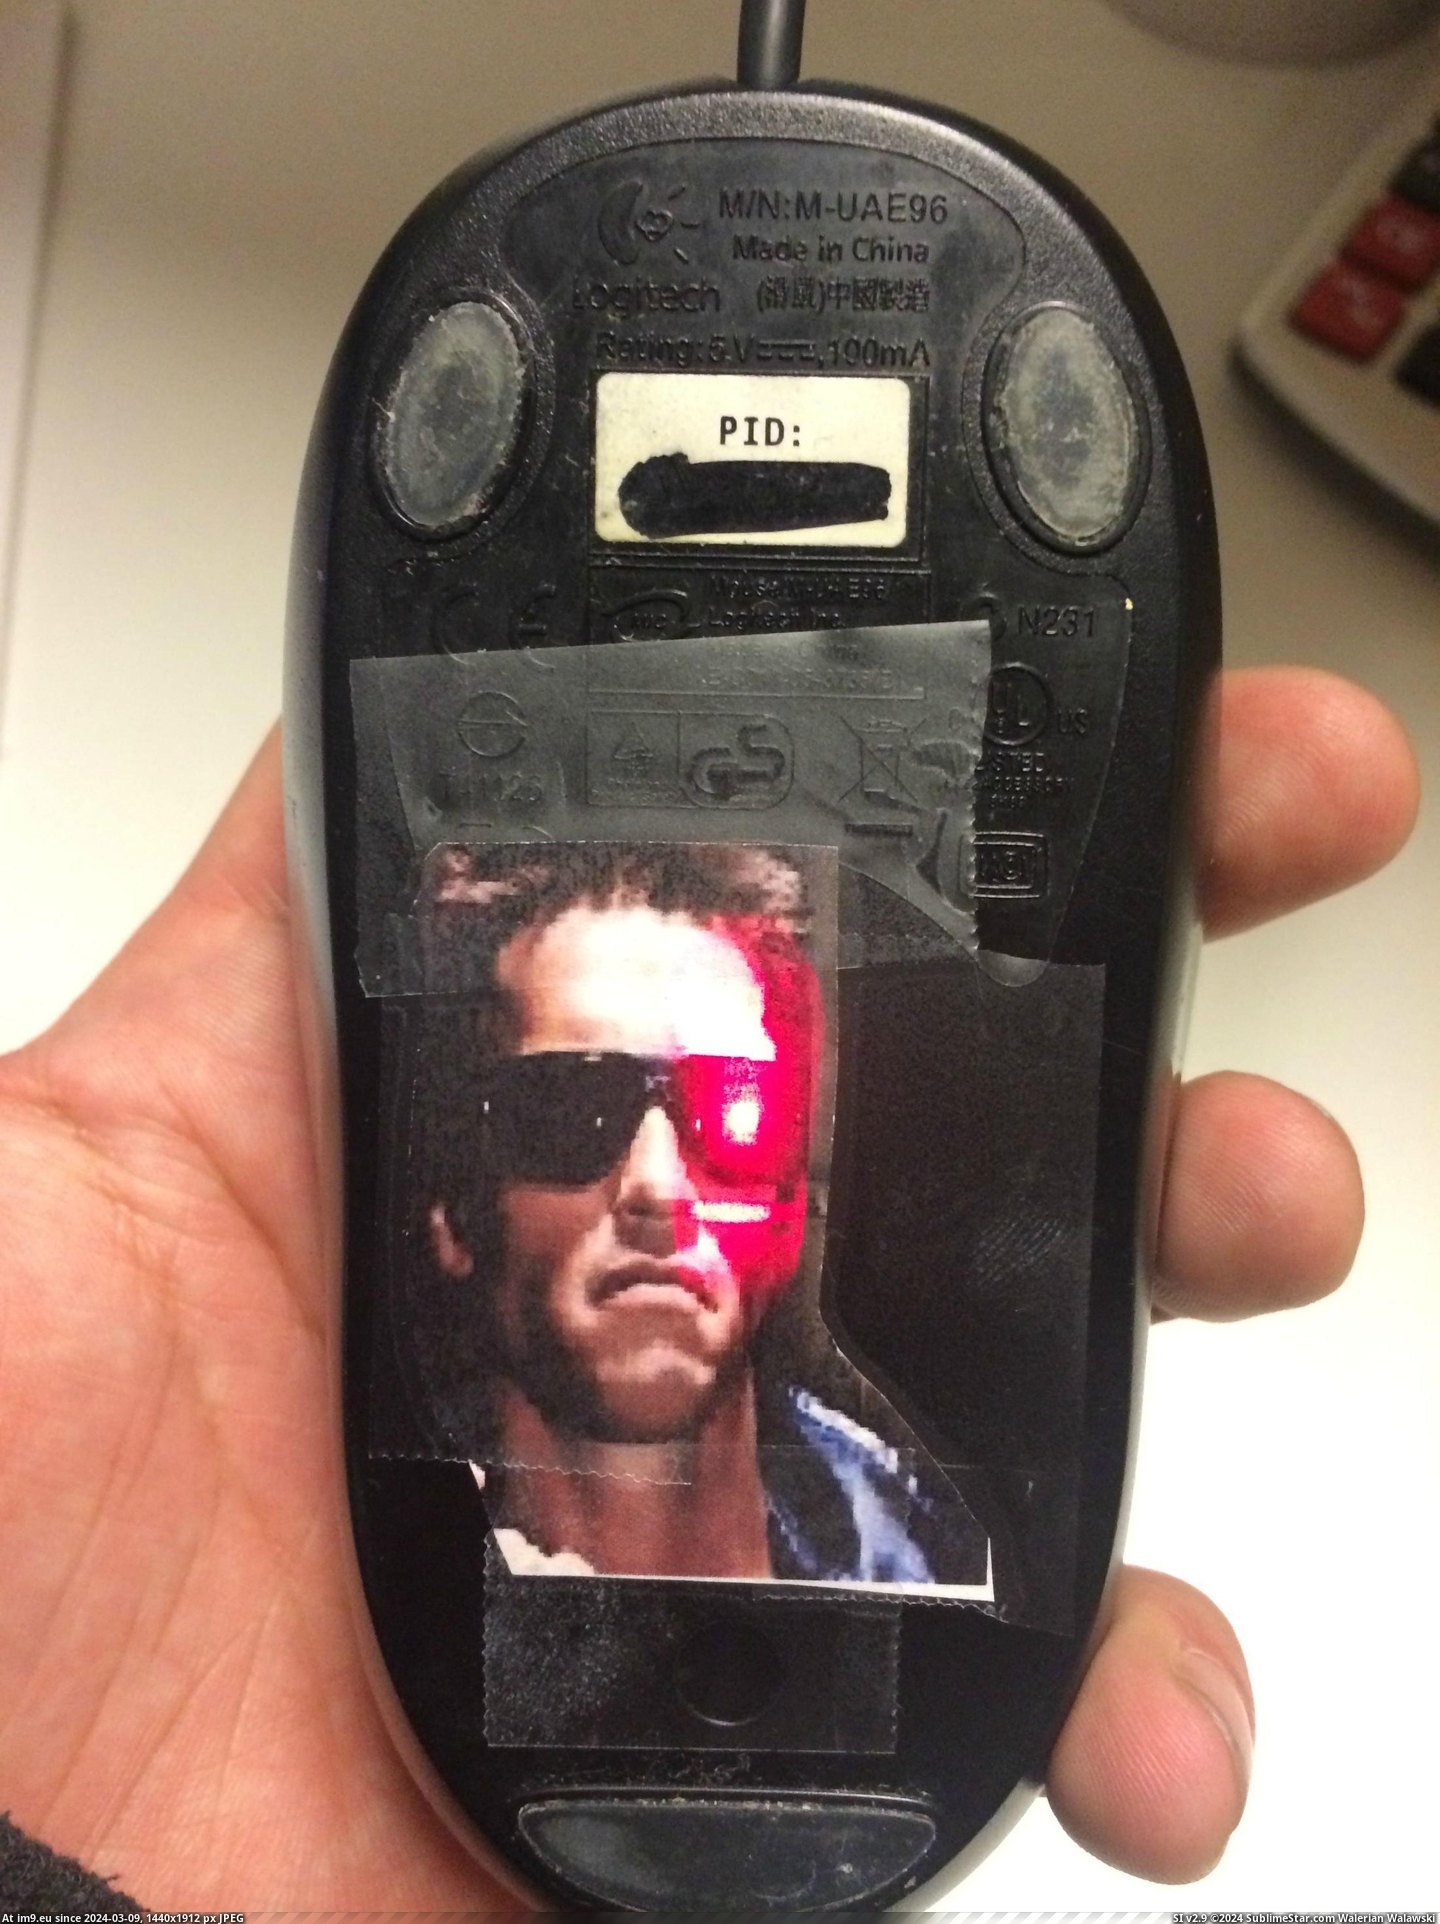 #Funny #Now #Office #Inches #Snowed #Underside #Person #Mouse #Coworker [Funny] It snowed 2 inches today, and I am the only person in the office. This is now the underside of my coworker's mouse... Pic. (Image of album My r/FUNNY favs))